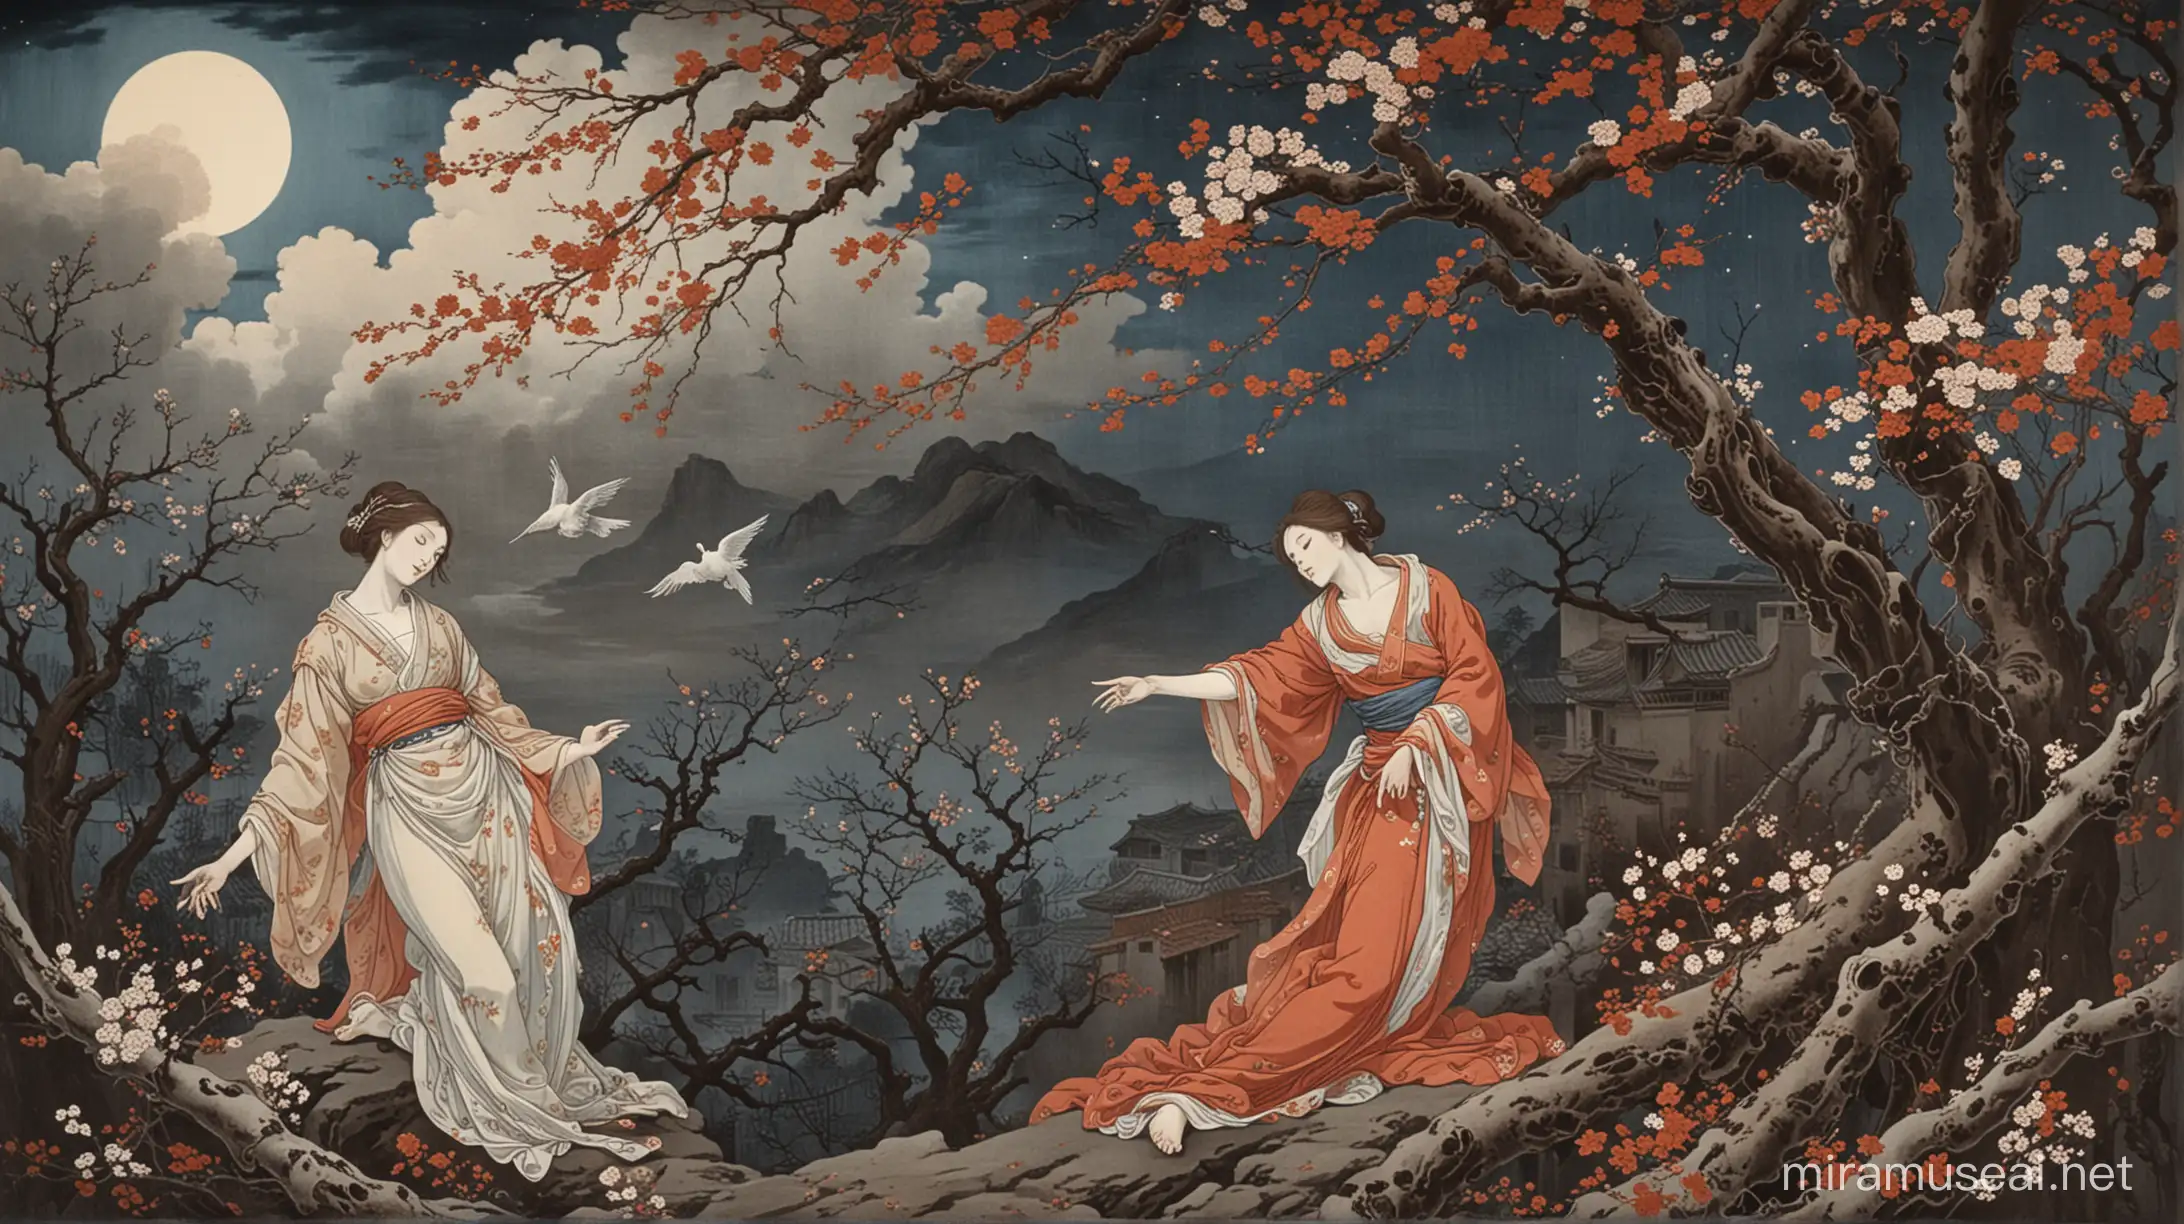 The death scene of Romeo and Juliet in each other's arms. Bloody sky and some withered branches and flowers. Hukusai style